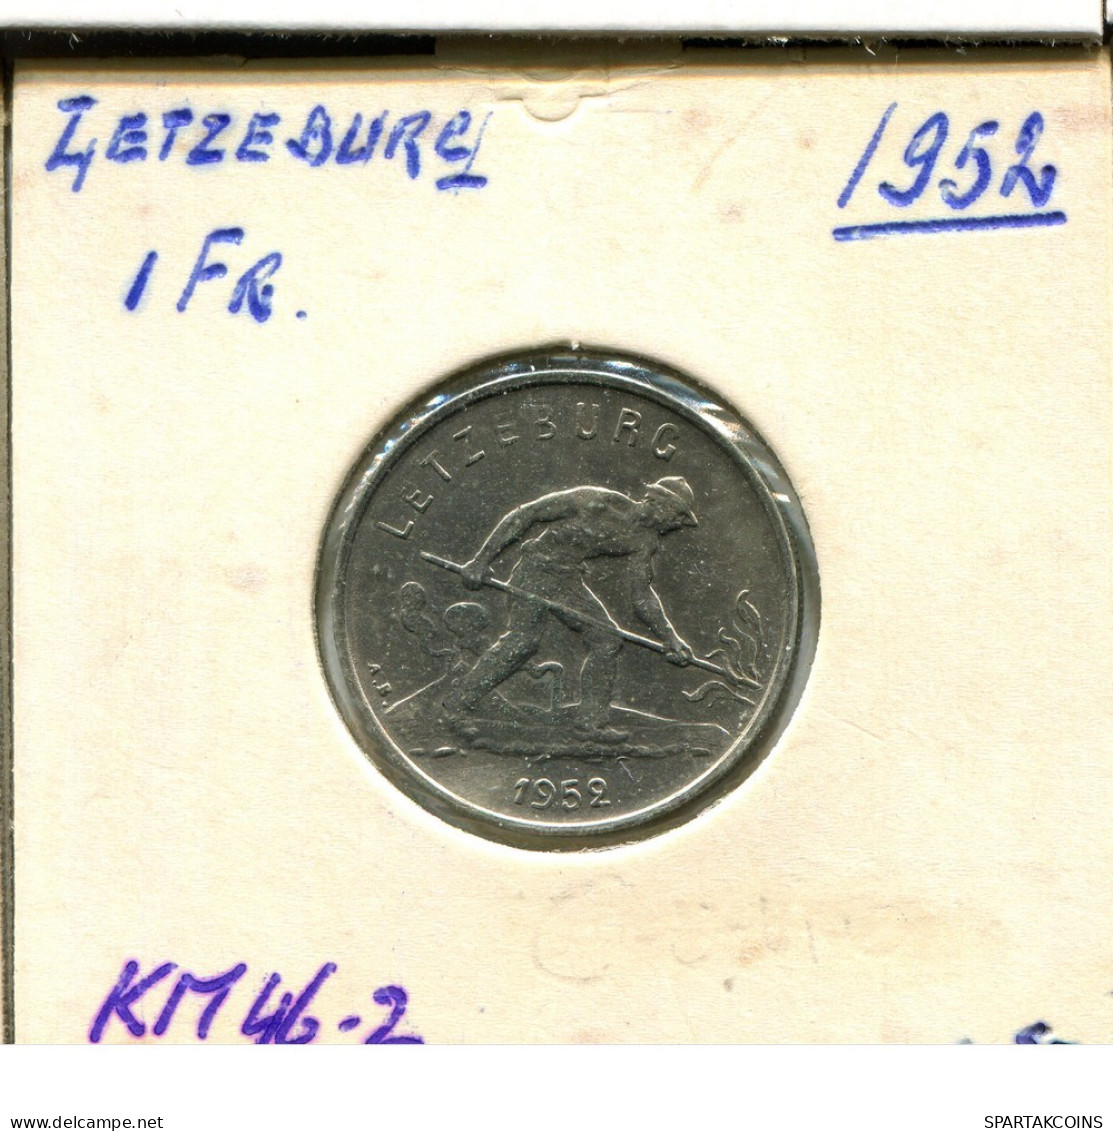 1 FRANC 1952 LUXEMBOURG Coin #AT202.U.A - Luxemburg